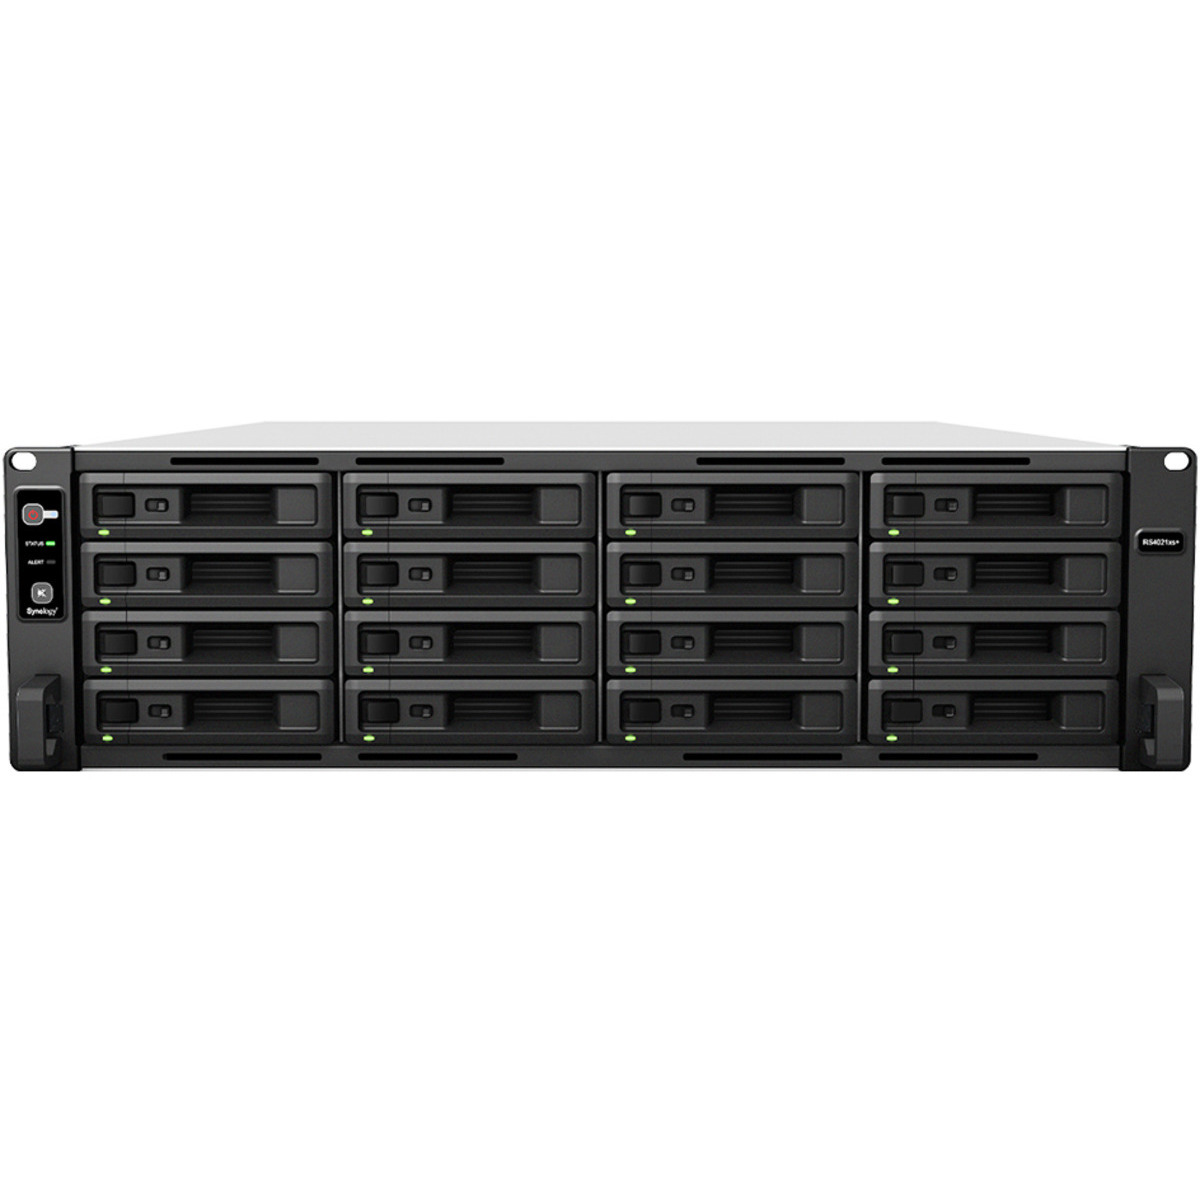 Synology RackStation RS4021xs+ 12tb 16-Bay RackMount Large Business / Enterprise NAS - Network Attached Storage Device 12x1tb Samsung 870 EVO MZ-77E1T0BAM 2.5 560/530MB/s SATA 6Gb/s SSD CONSUMER Class Drives Installed - Burn-In Tested RackStation RS4021xs+